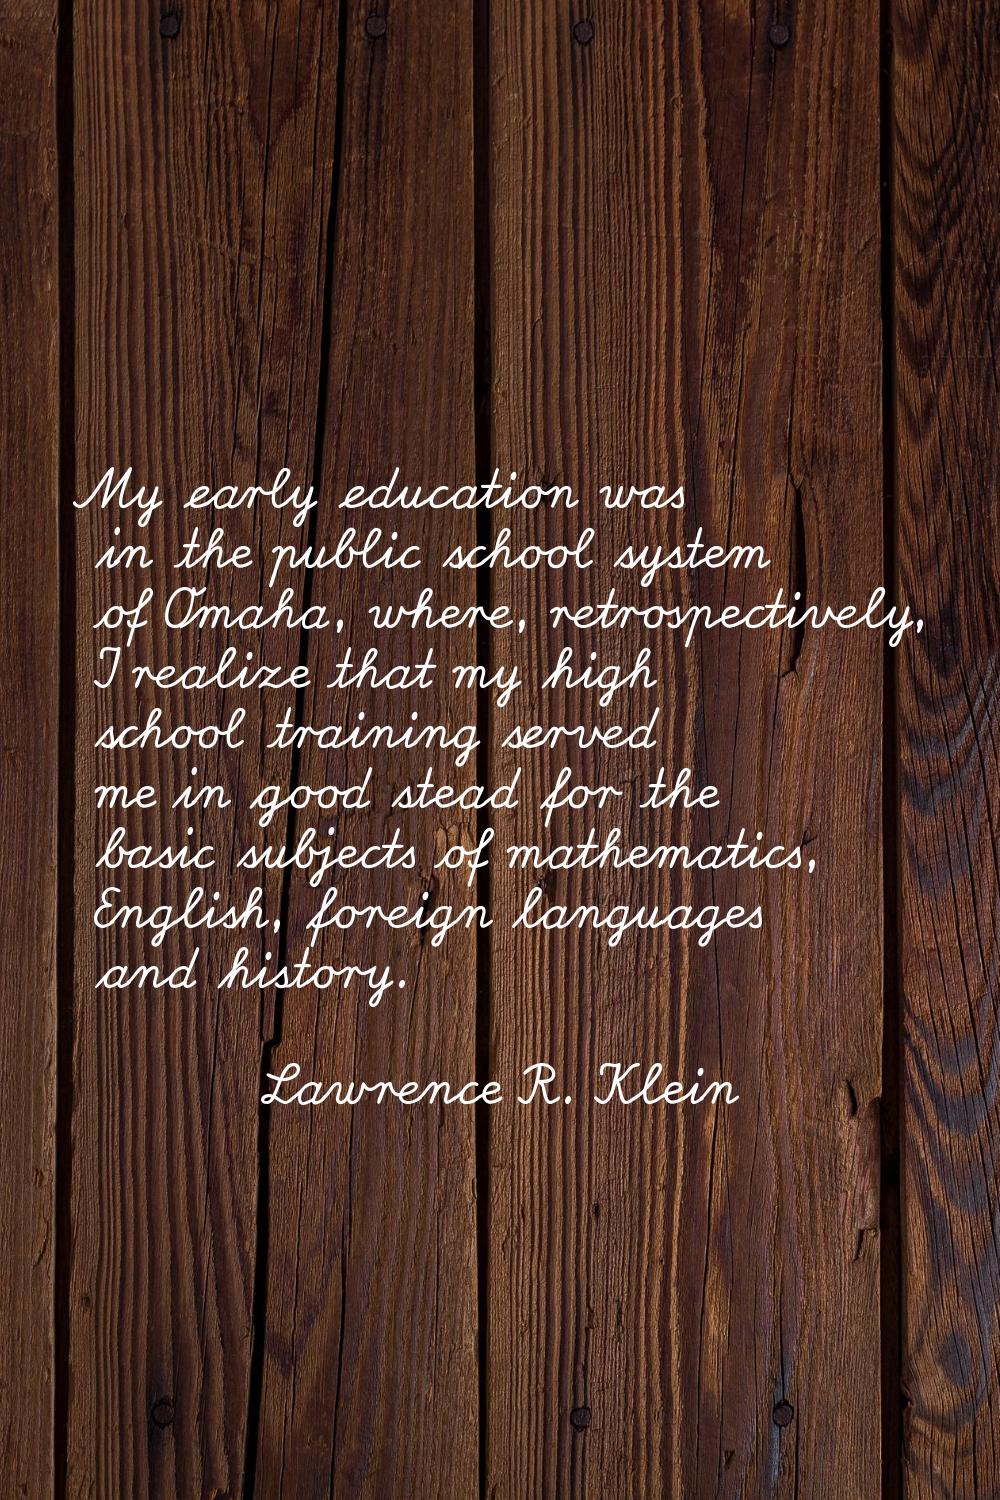 My early education was in the public school system of Omaha, where, retrospectively, I realize that